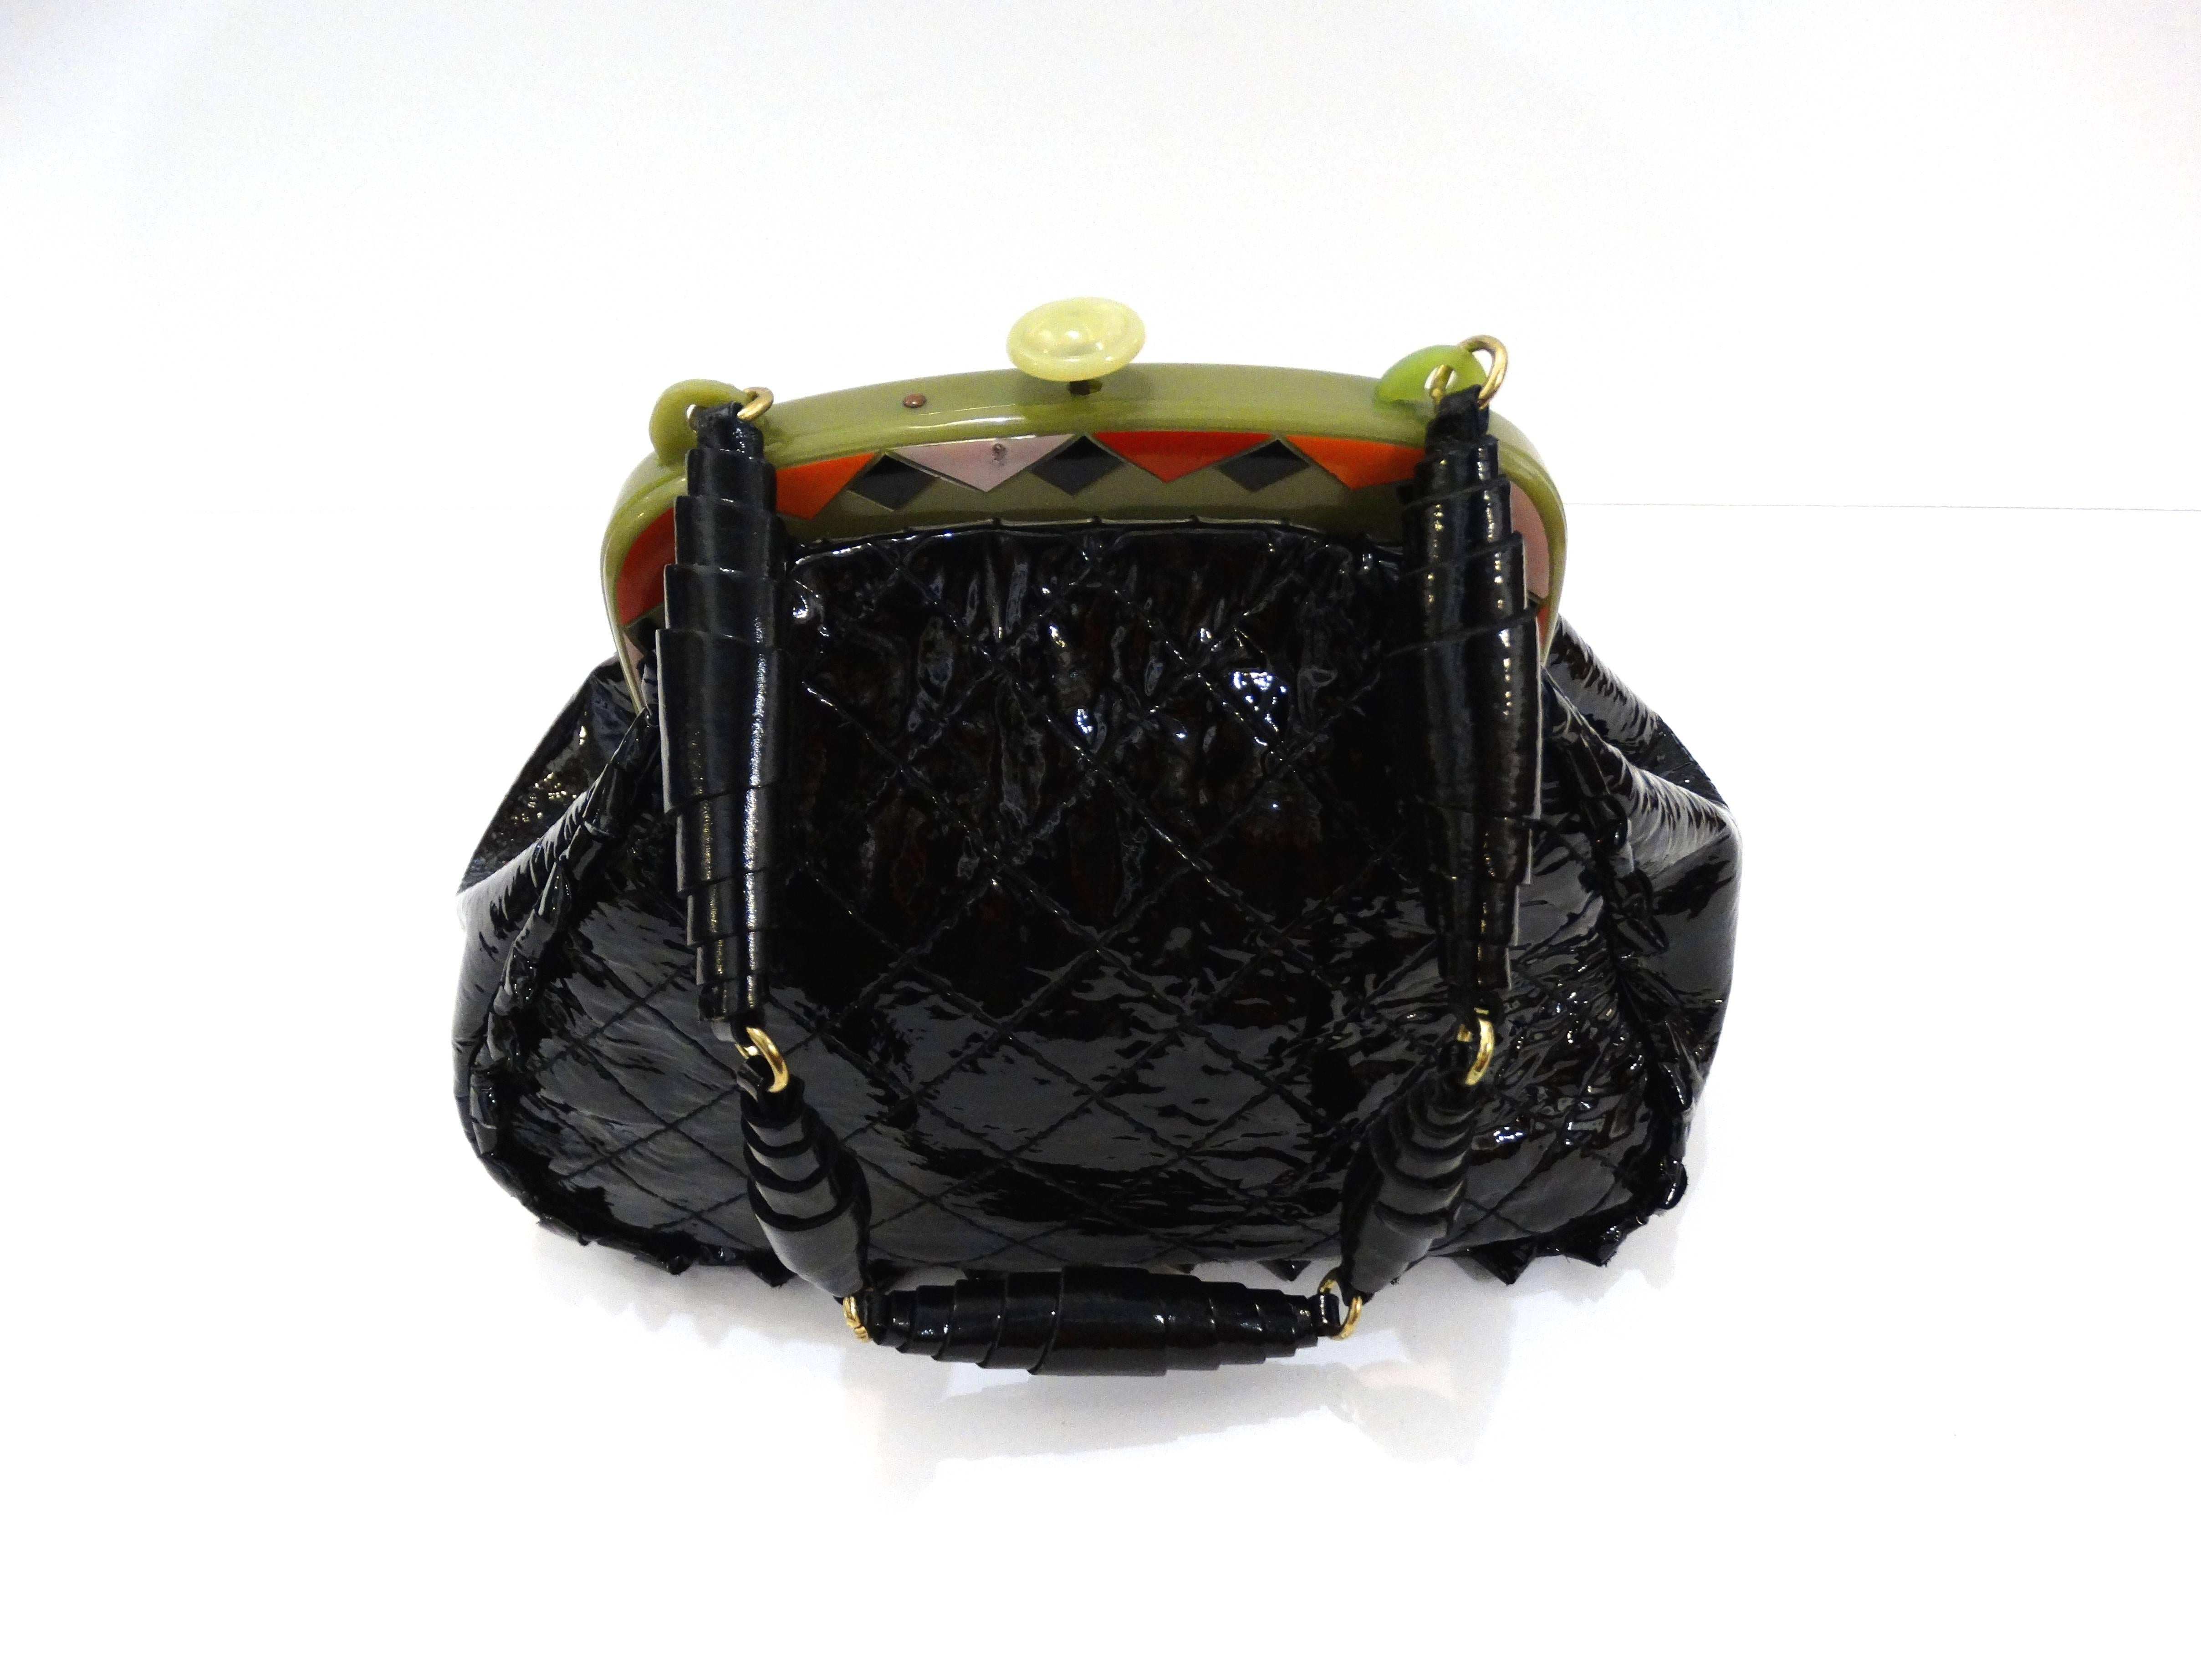 Amazing custom vintage Anthony Luciano black quilted patent handbag, exterior accentuated with a serrated trim. A green plastic top frame featuring colorful red, pastel black geometric shapes, and a unique rolled leather beaded handle. Push to open